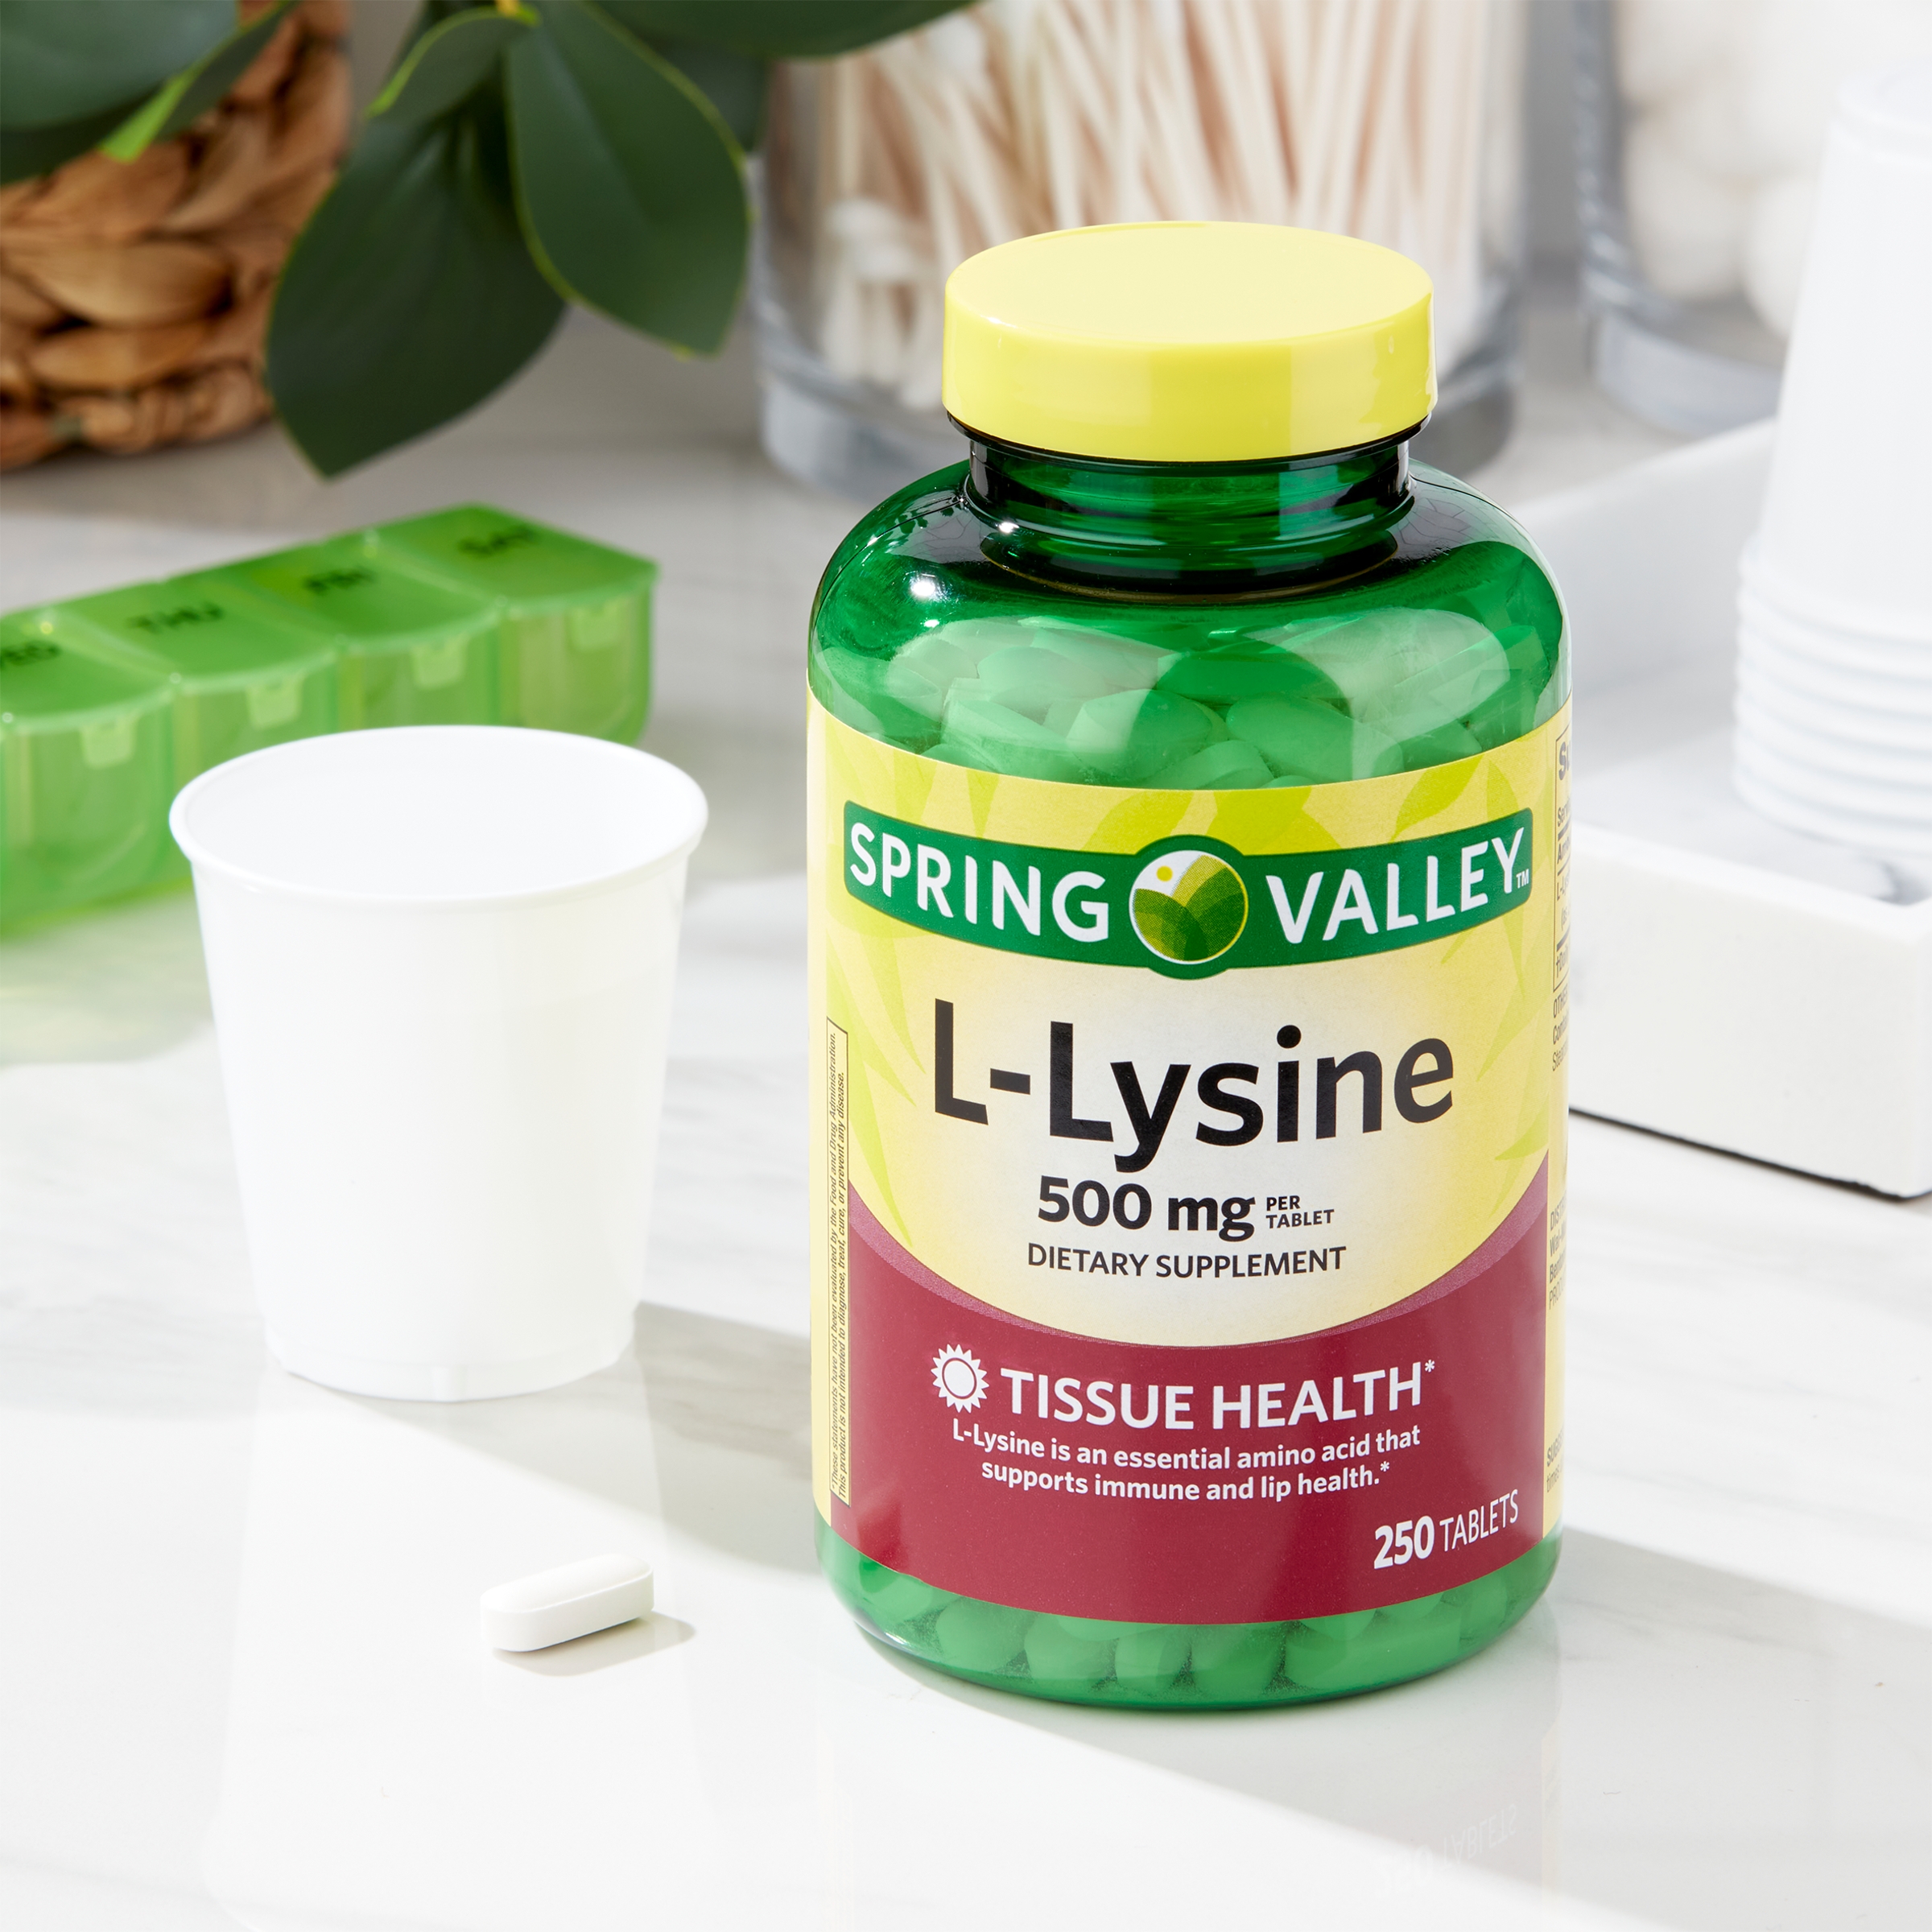 Spring Valley L-Lysine Dietary Supplement, 500 mg, 250 Count - image 4 of 9